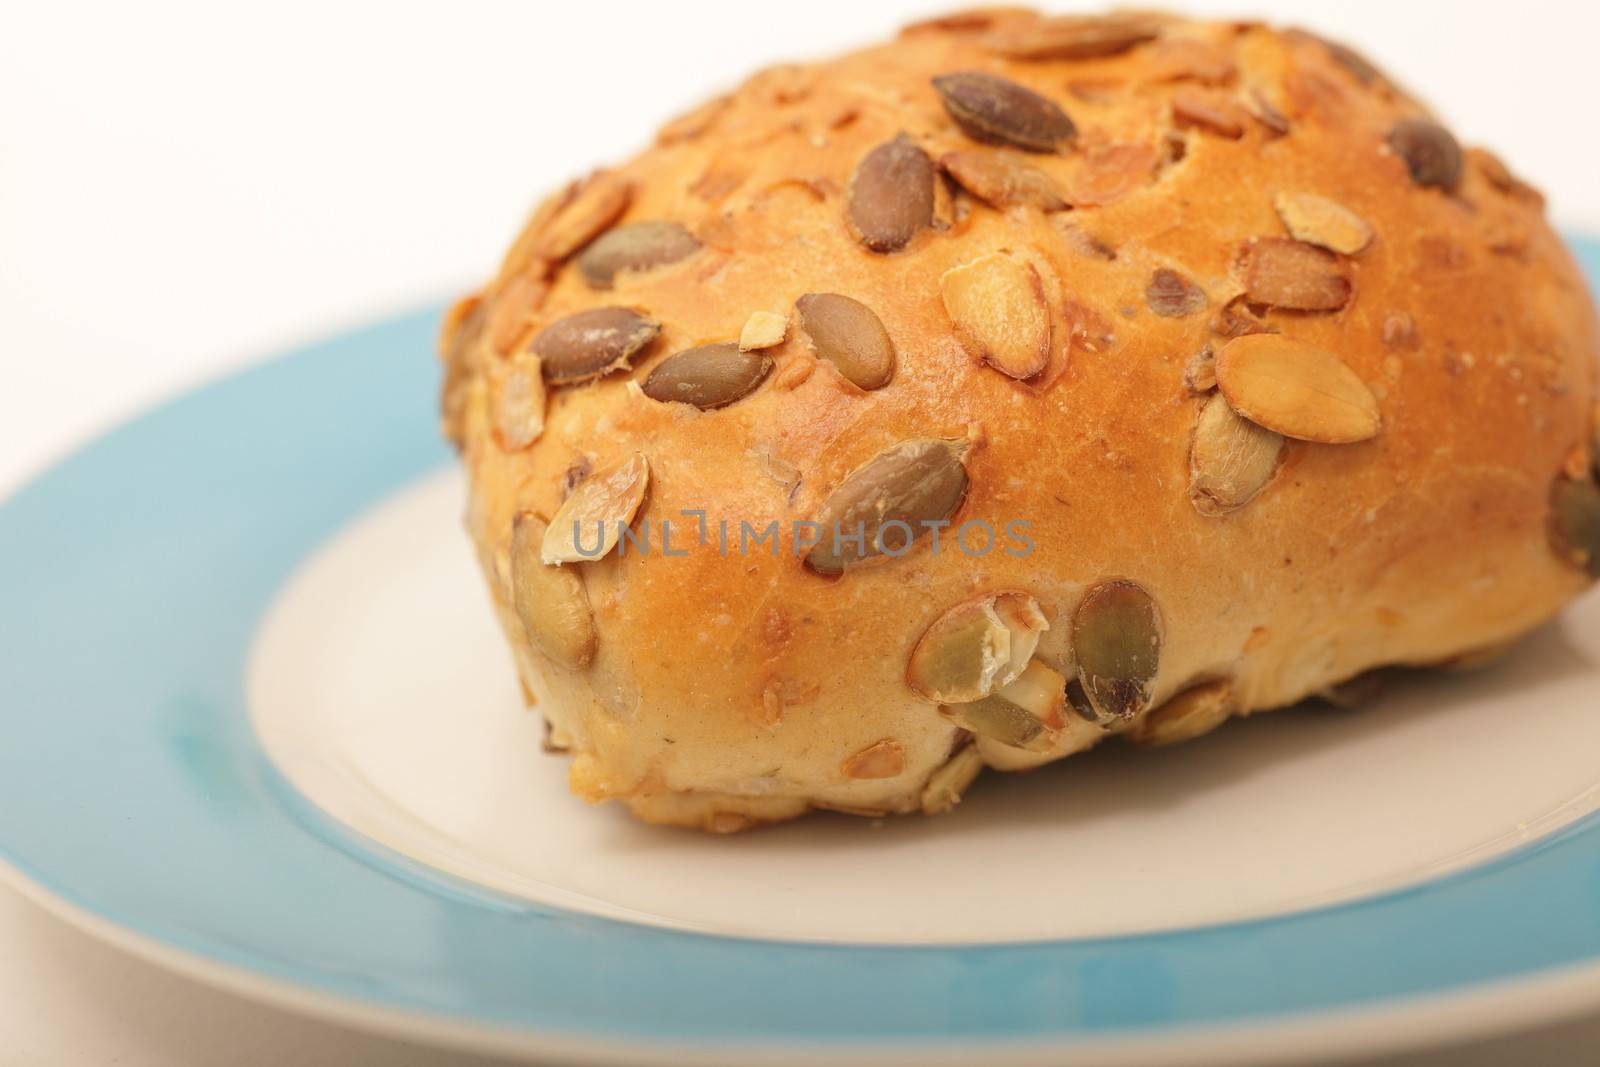 Freshly baked sunflower seed roll by Farina6000